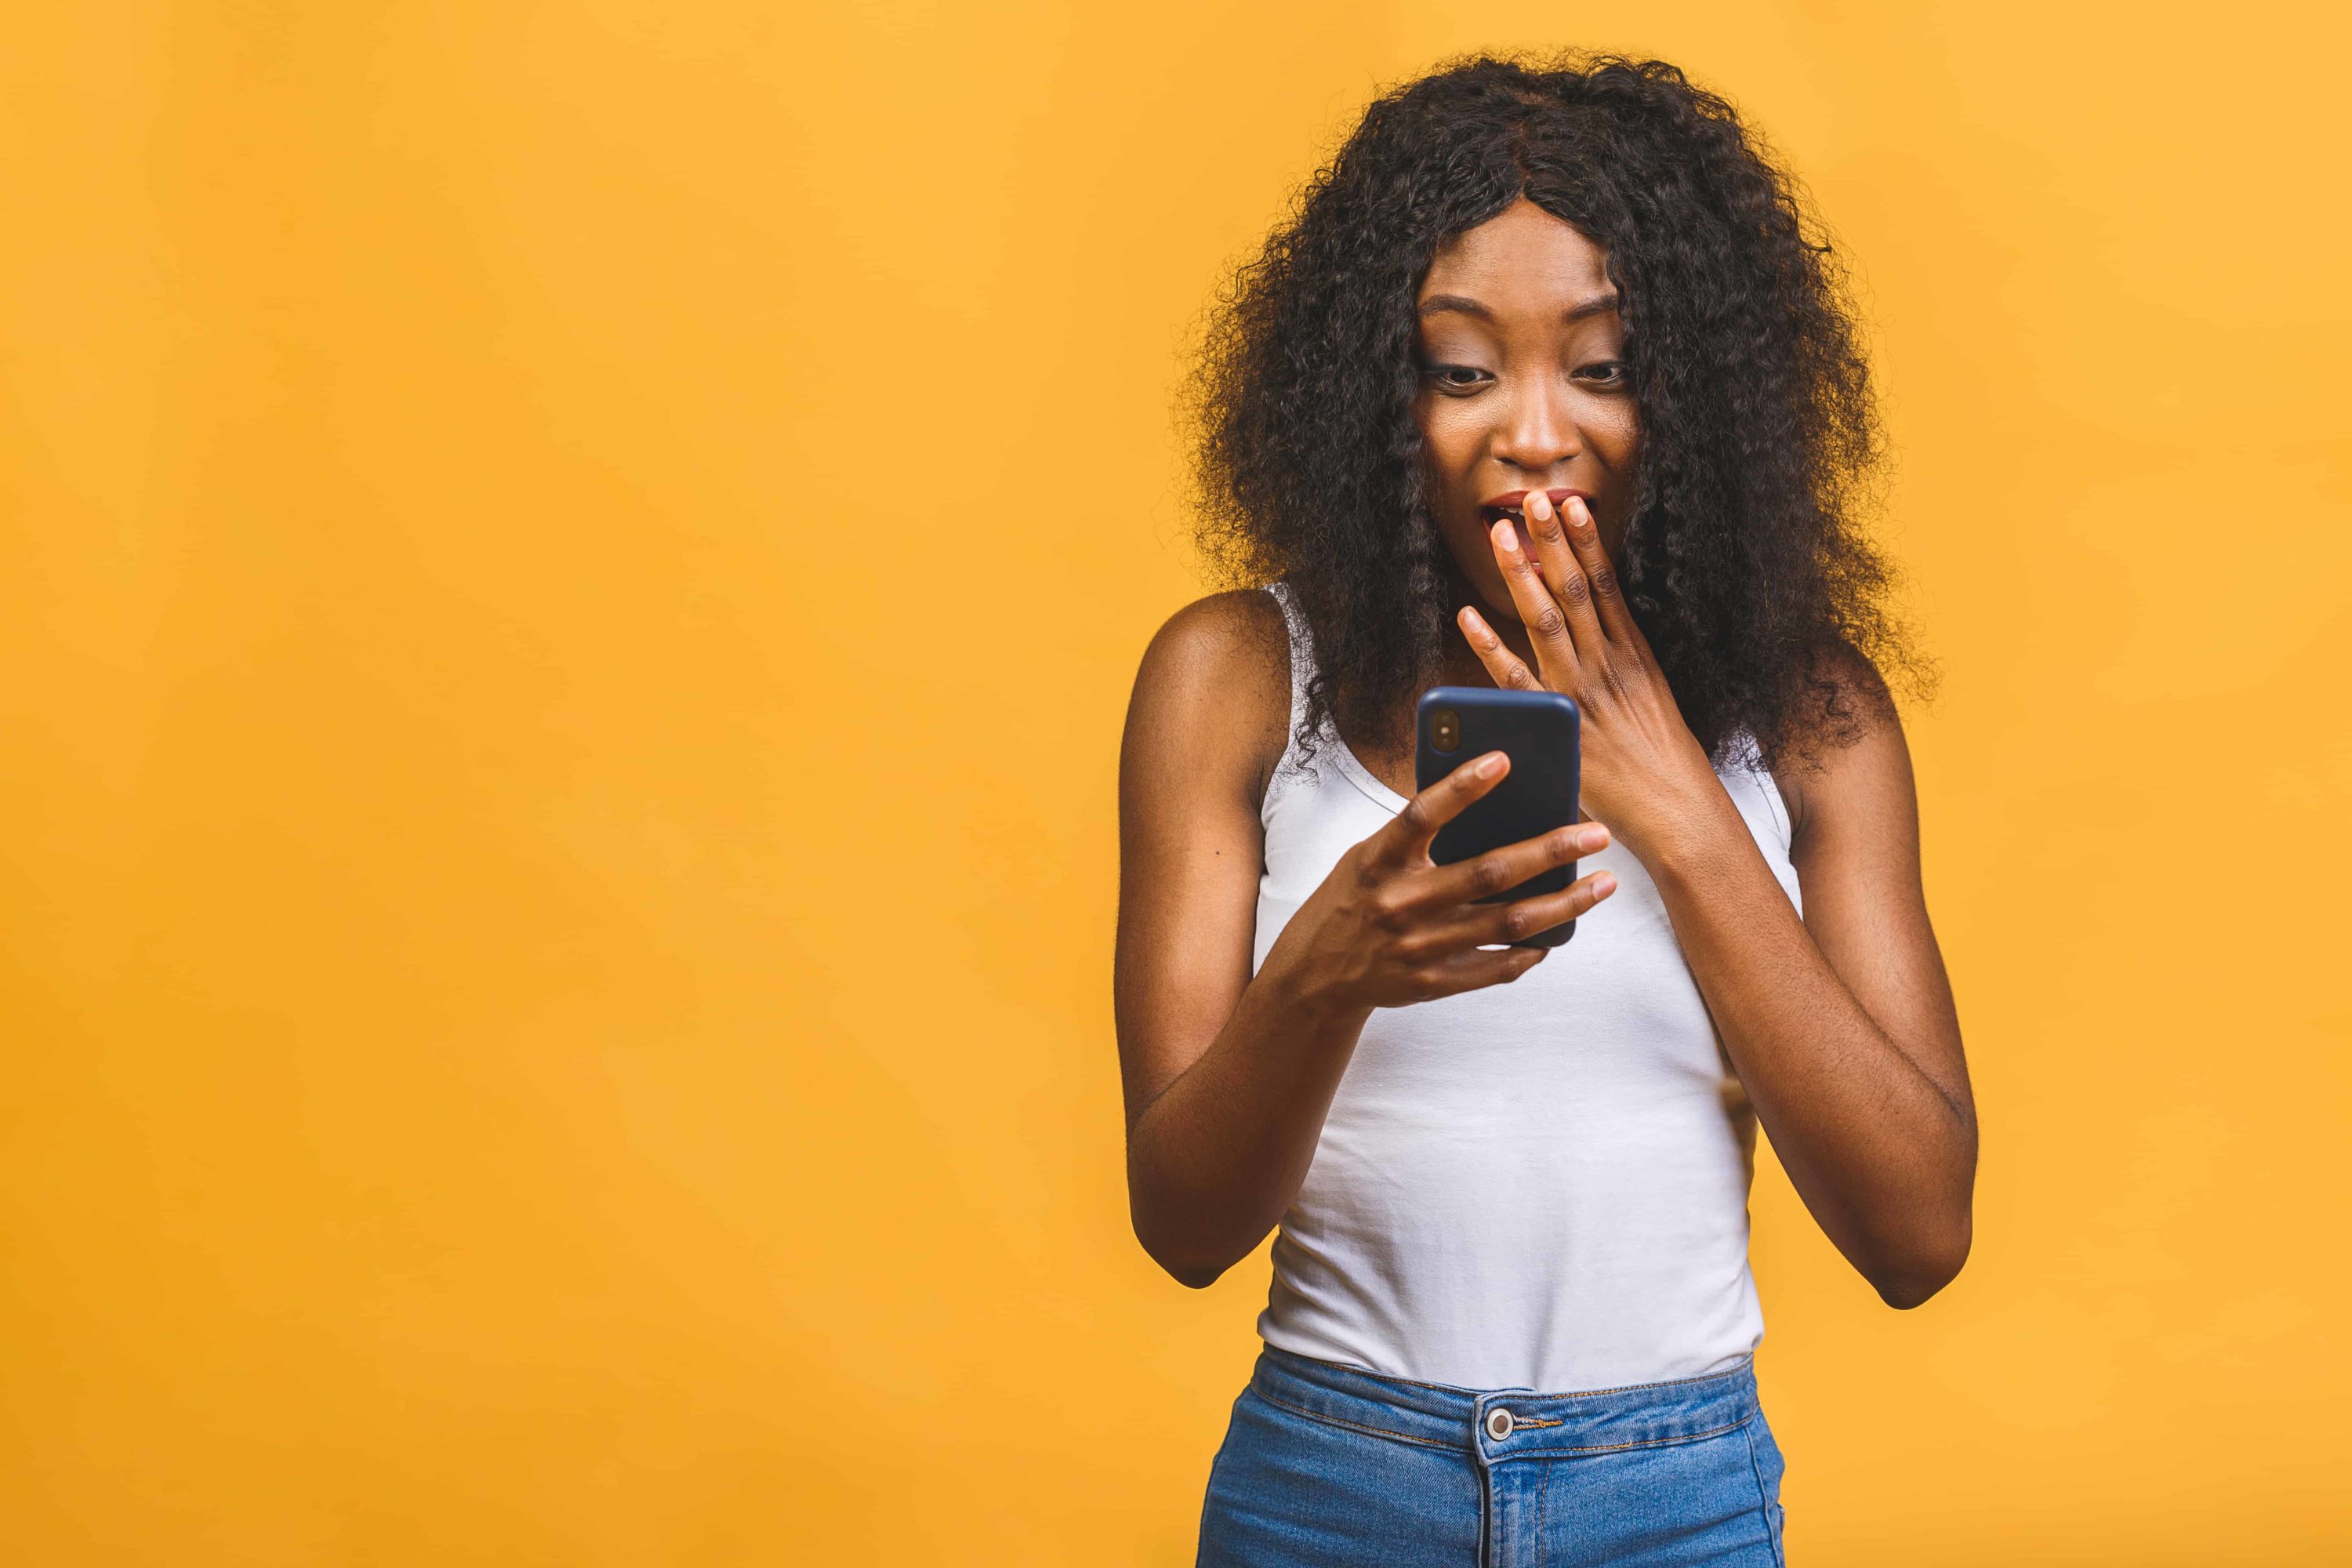 In this Ultimate Guide, a young black woman is seen glancing at her phone with her mouth open.